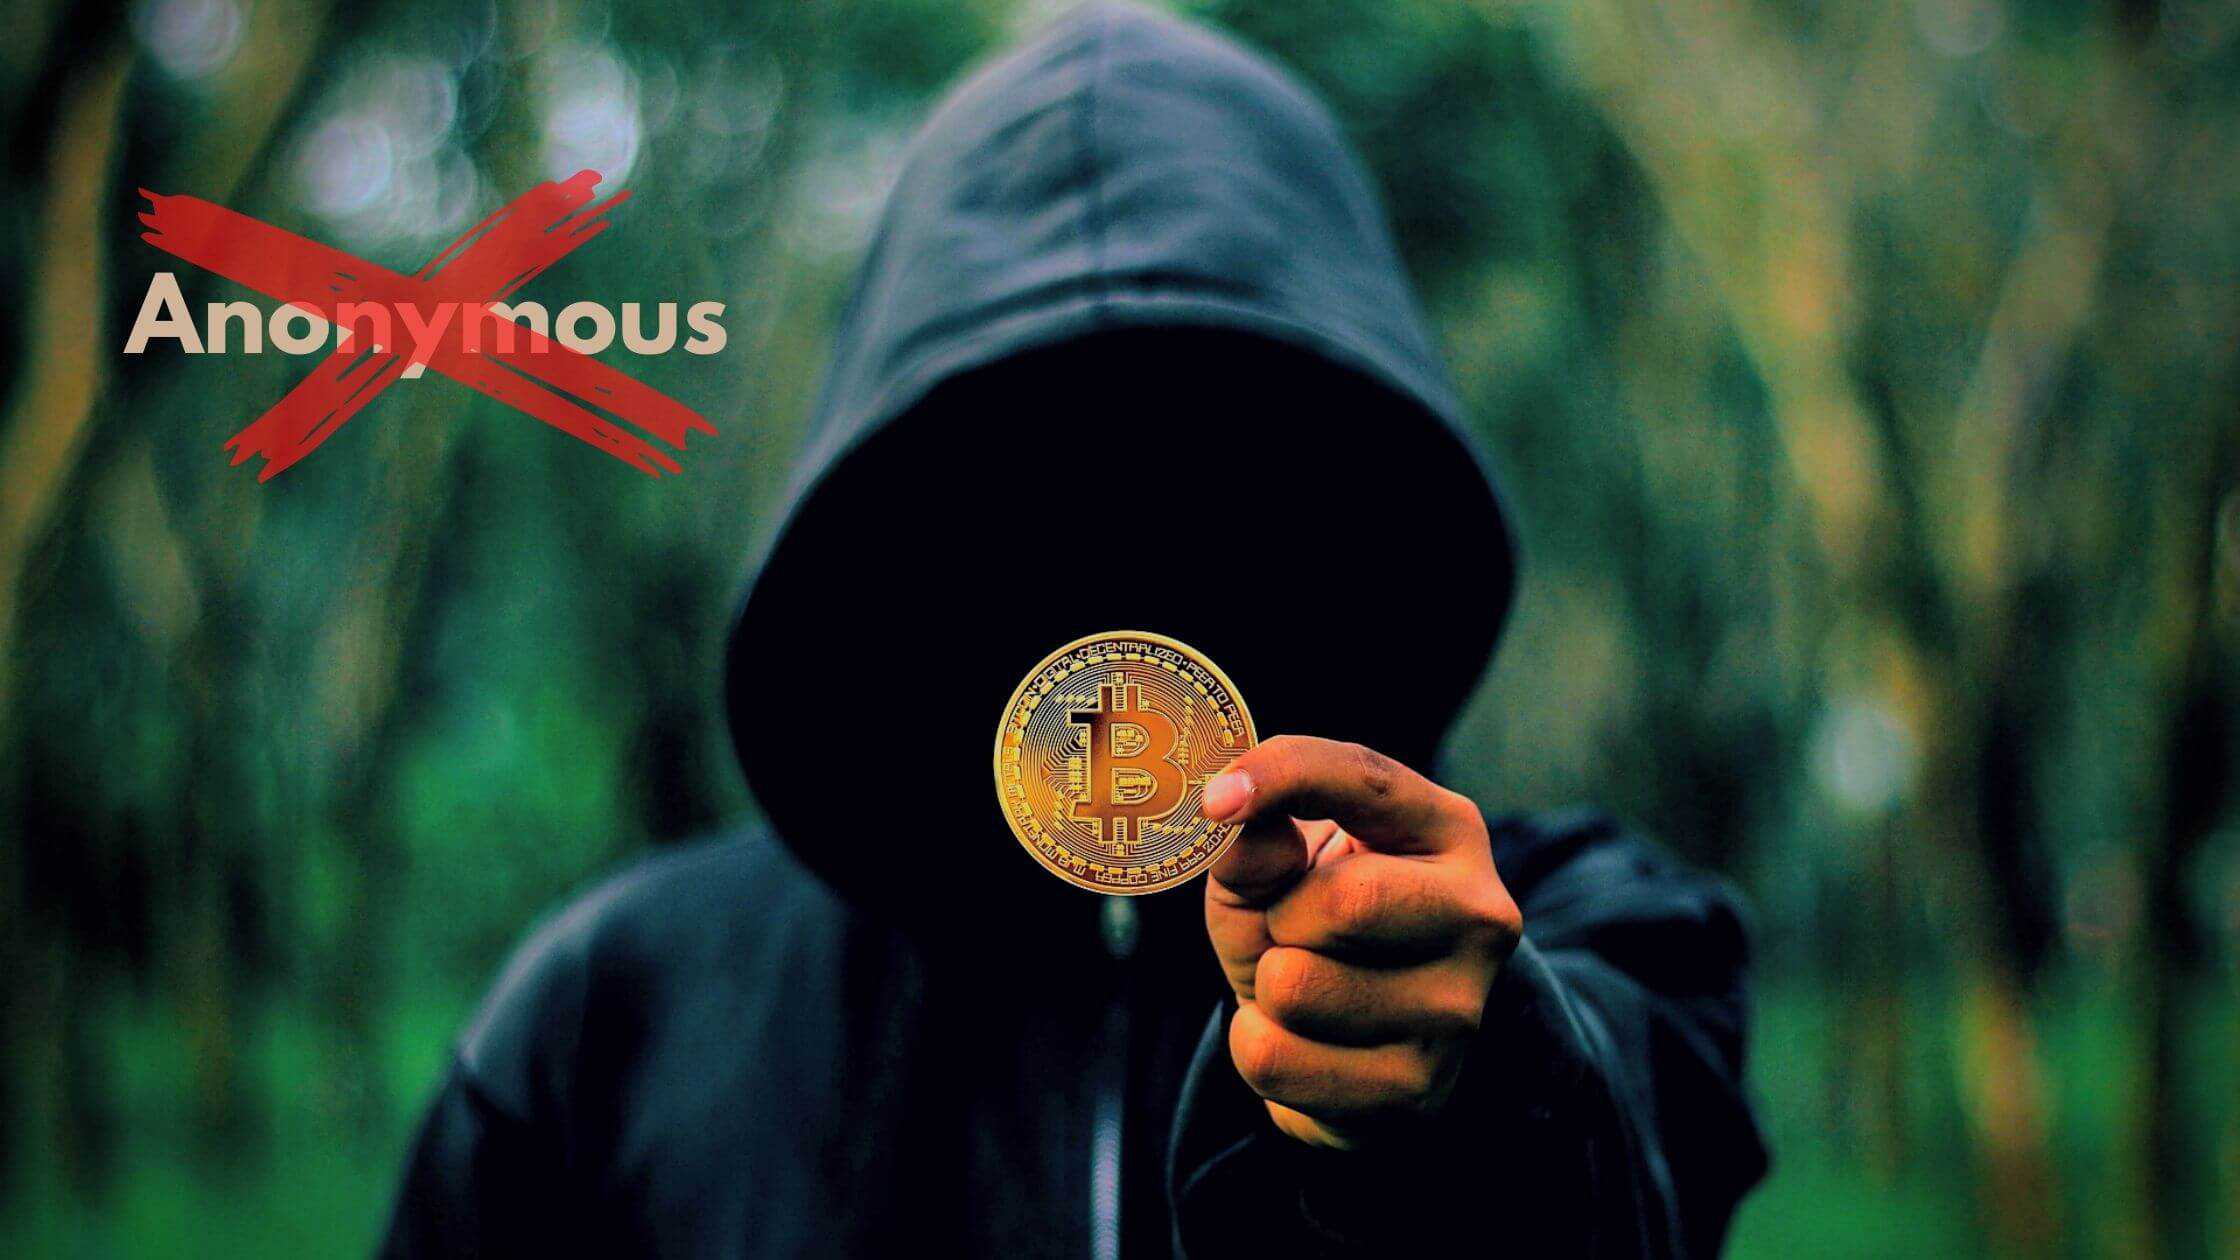 Bitcoin Mining Is Not Anonymous